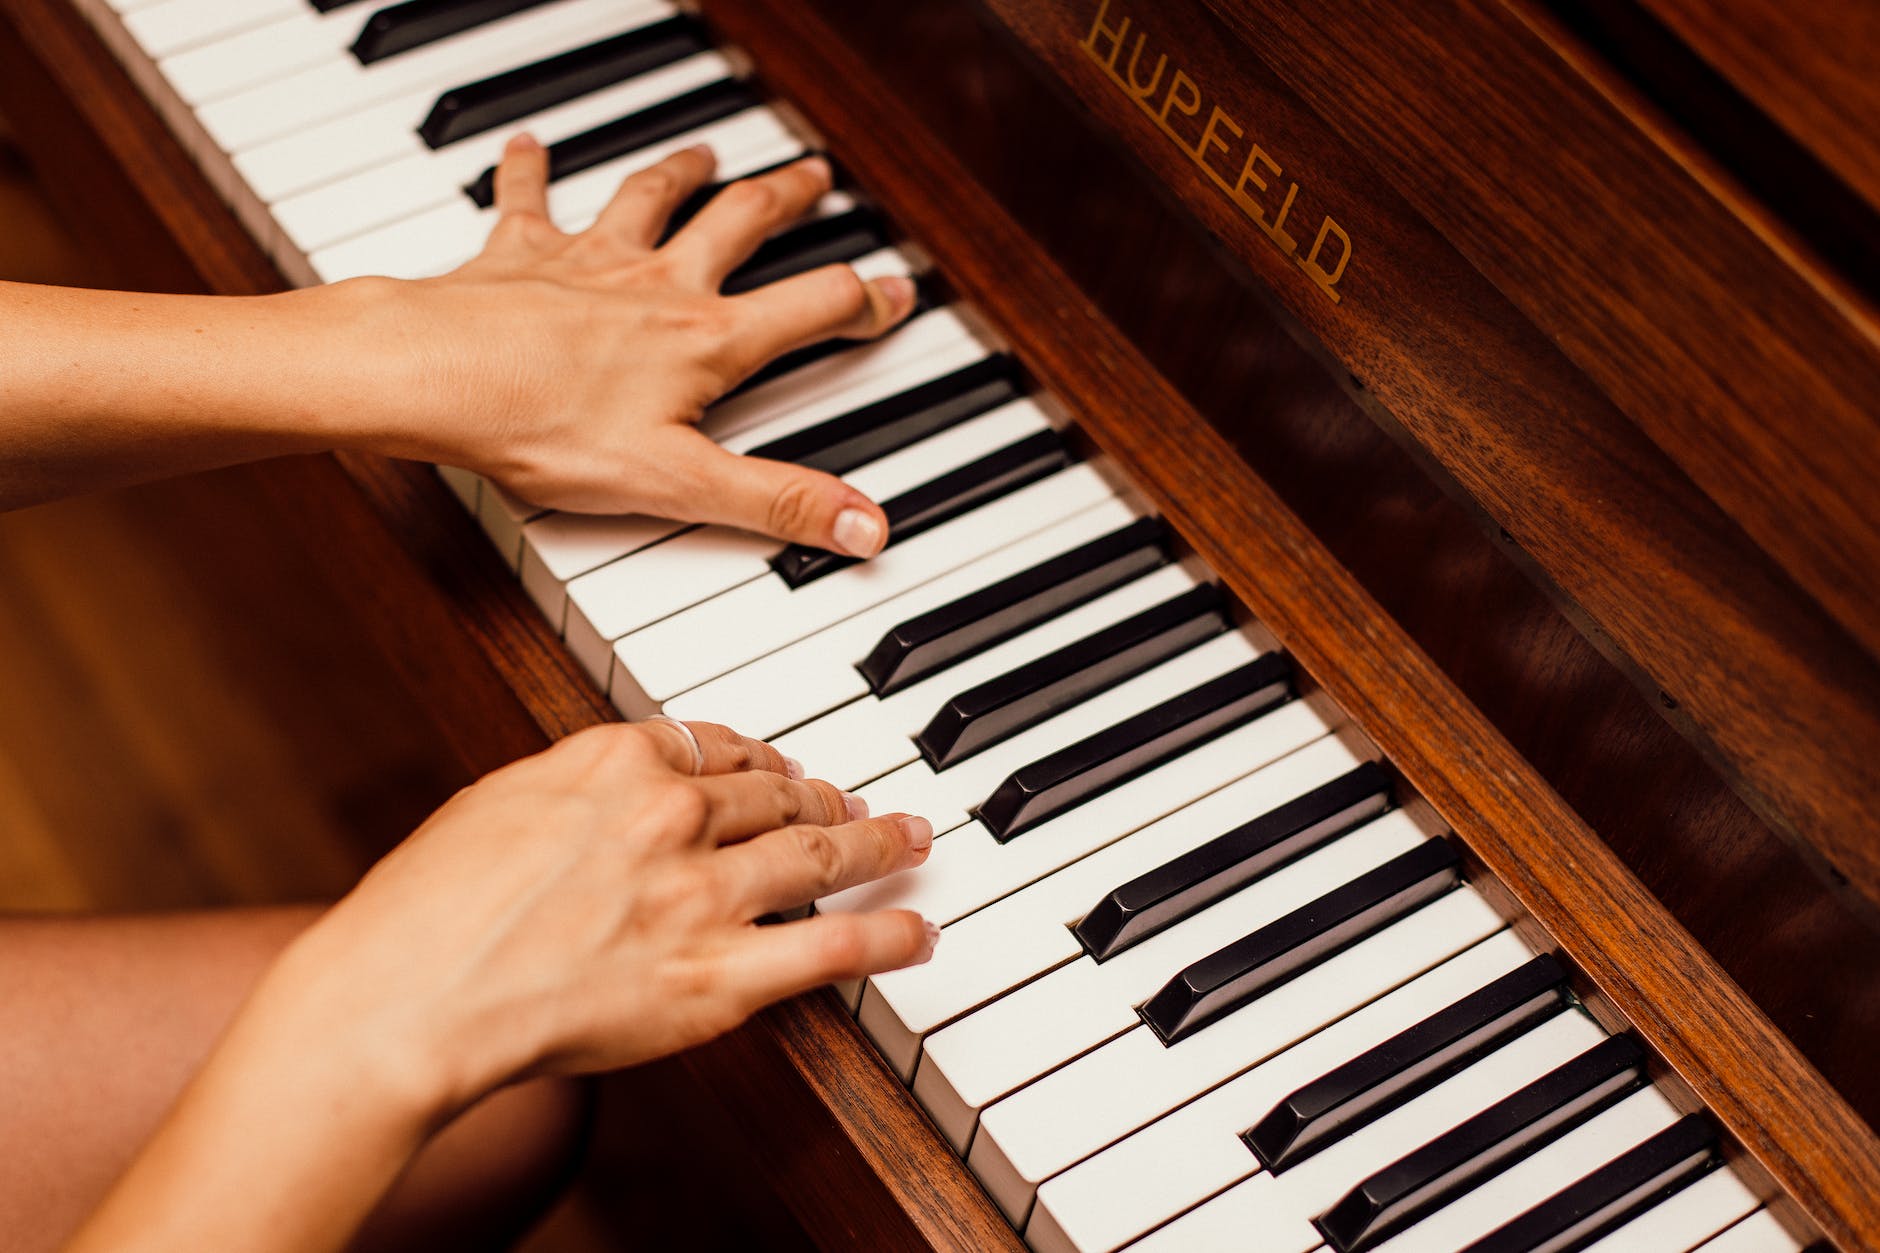 close up photo of person playing piano